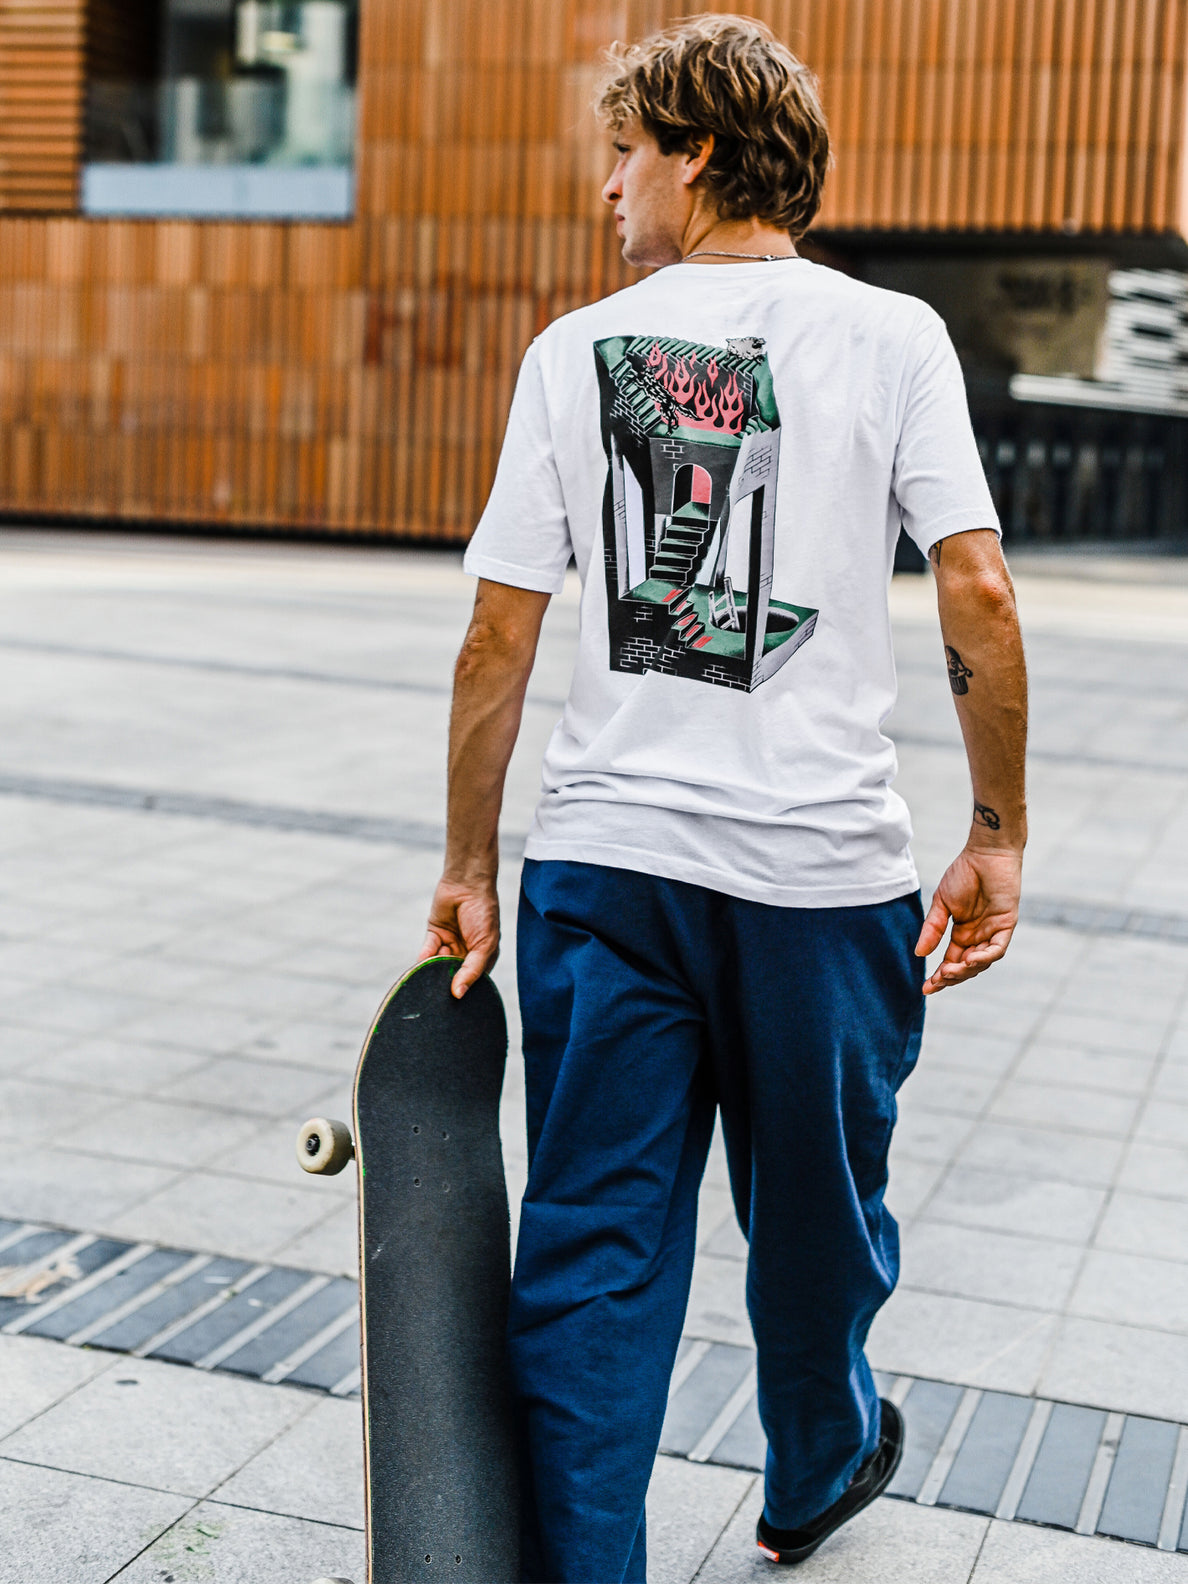 How to get the skater style fashion look in Hong Kong: from Louis